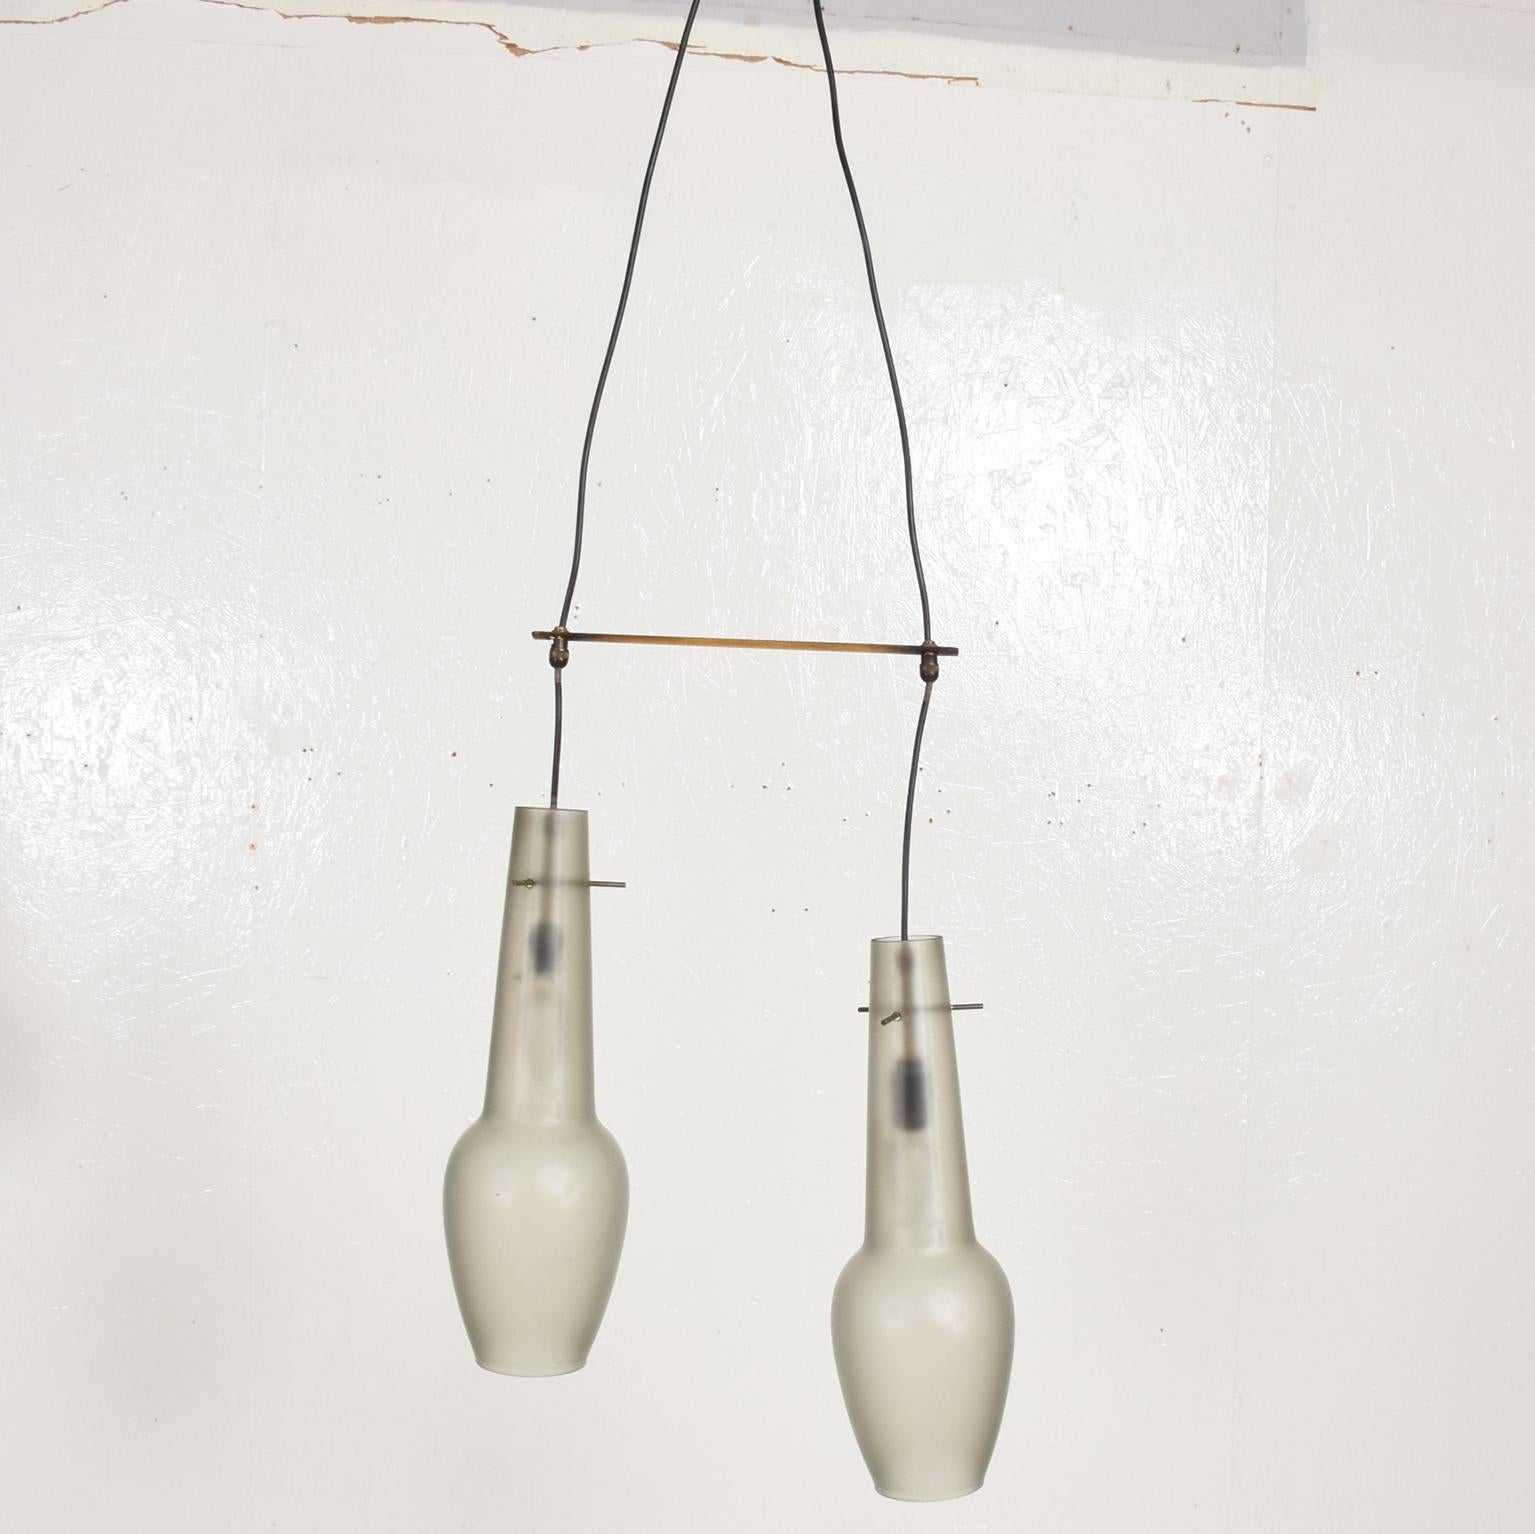 For your consideration, Mid-Century Modern Italian pendant chandelier with two frosted glass shades, Stilnovo era.

Made in Italy, circa 1960s. It requires two E-14 bulbs. Beautiful original condition. Brass has vintage patina.

Dimensions: 50